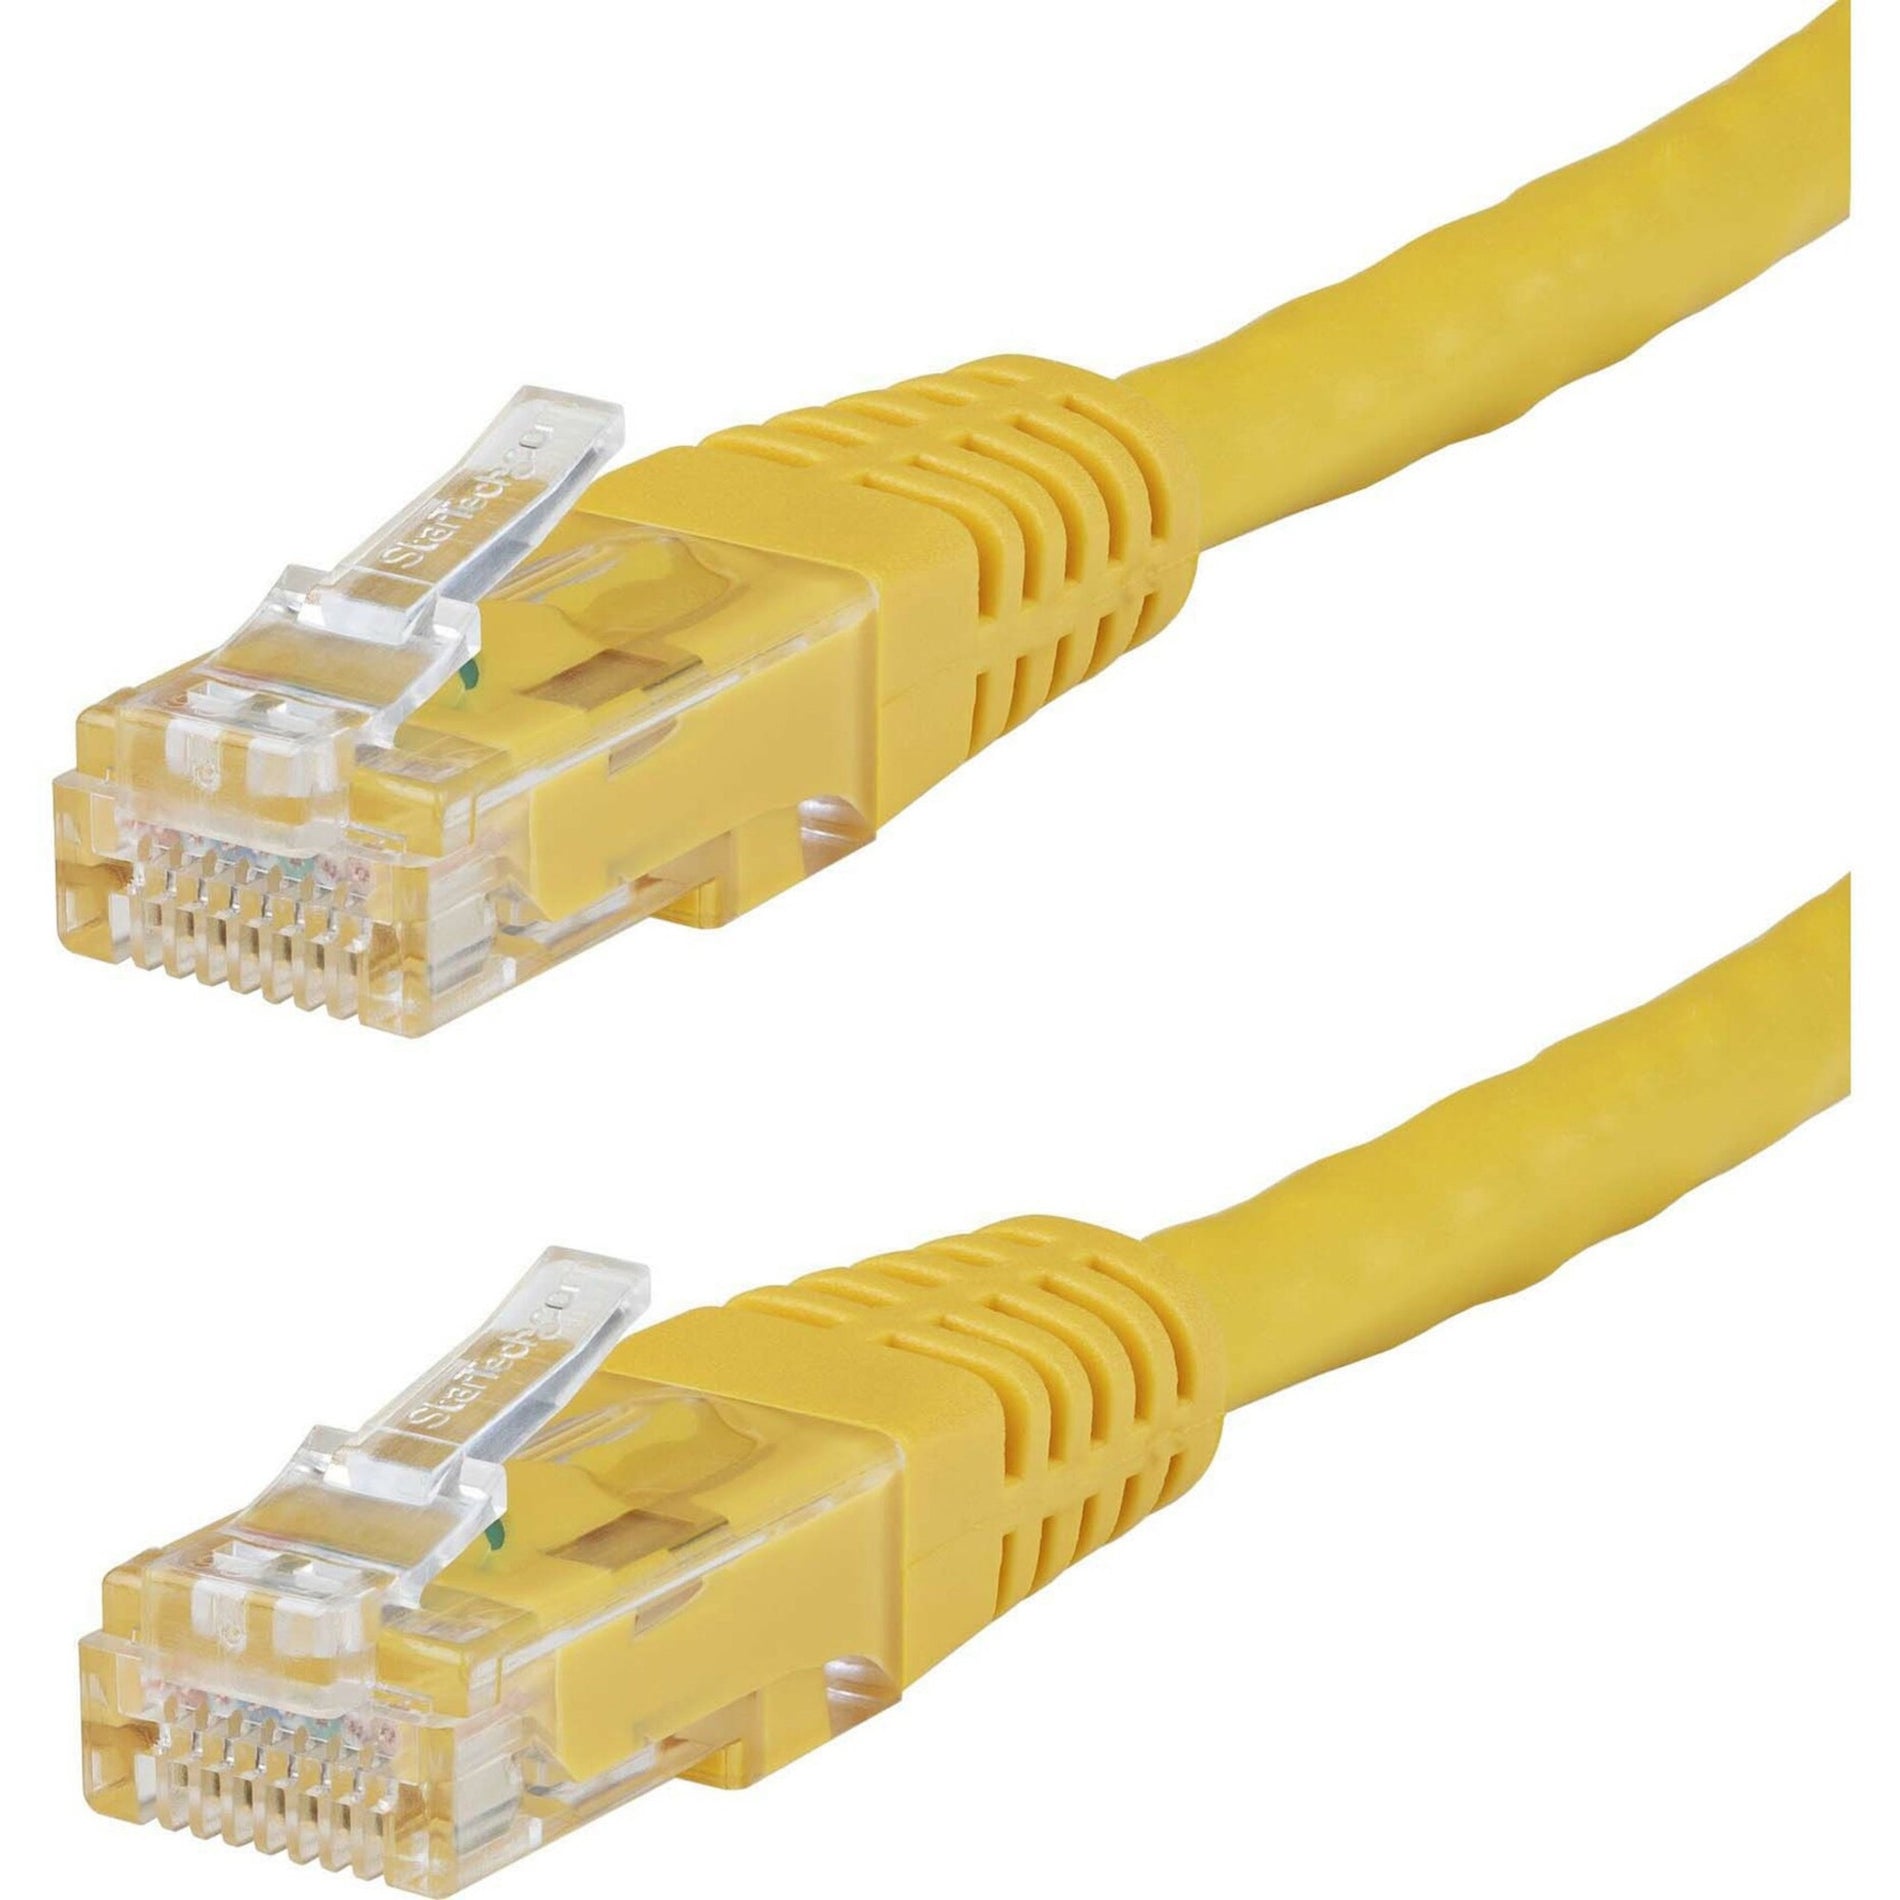 StarTech.com C6PATCH5YL 5ft Yellow Cat6 UTP Patch Cable, ETL Verified, 10 Gbit/s Data Transfer Rate